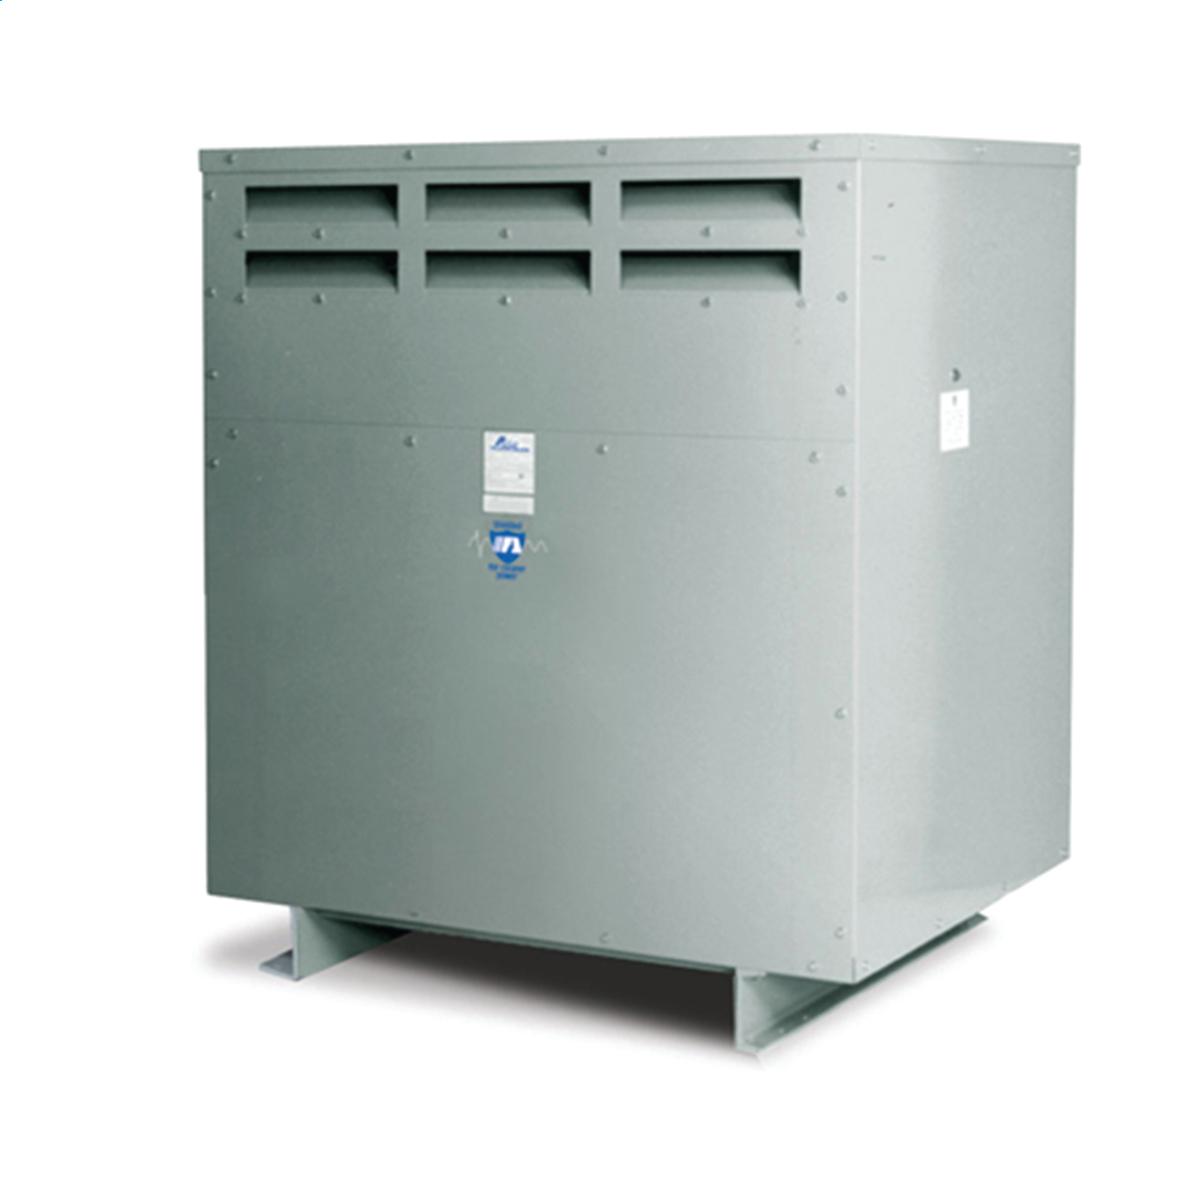 Hubbell WI015M24 Medium Voltage Transformer - Three Phase, 4800Δ - 480ΔV, 1500kVA  ; Lower operating cost over Liquid-filled ; No additional fireproofing or venting ; Long life expectancy ; Smaller, lighter easy to maintain